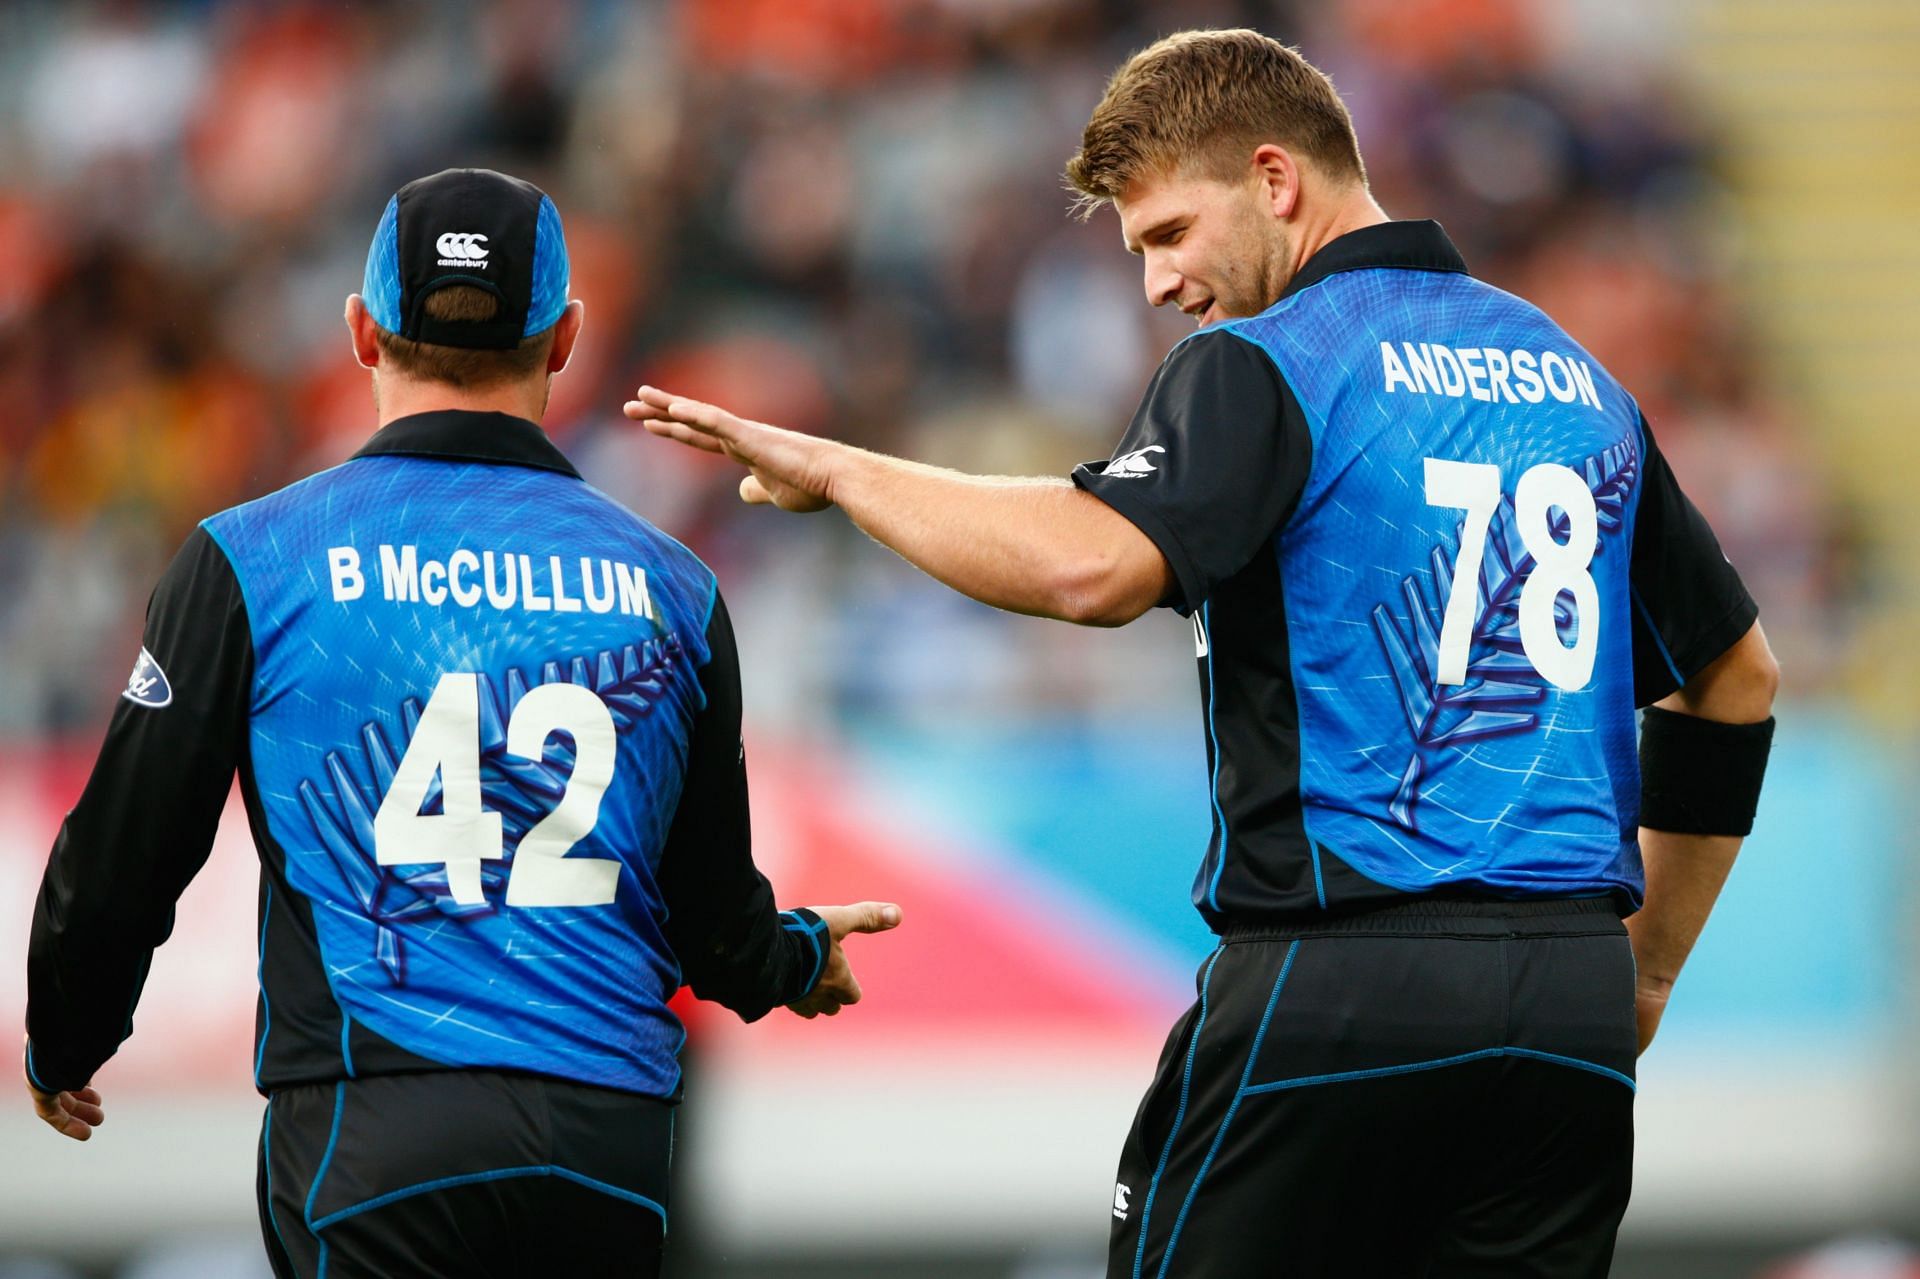 New Zealand v South Africa: Semi Final - 2015 ICC Cricket World Cup (Image: Getty)